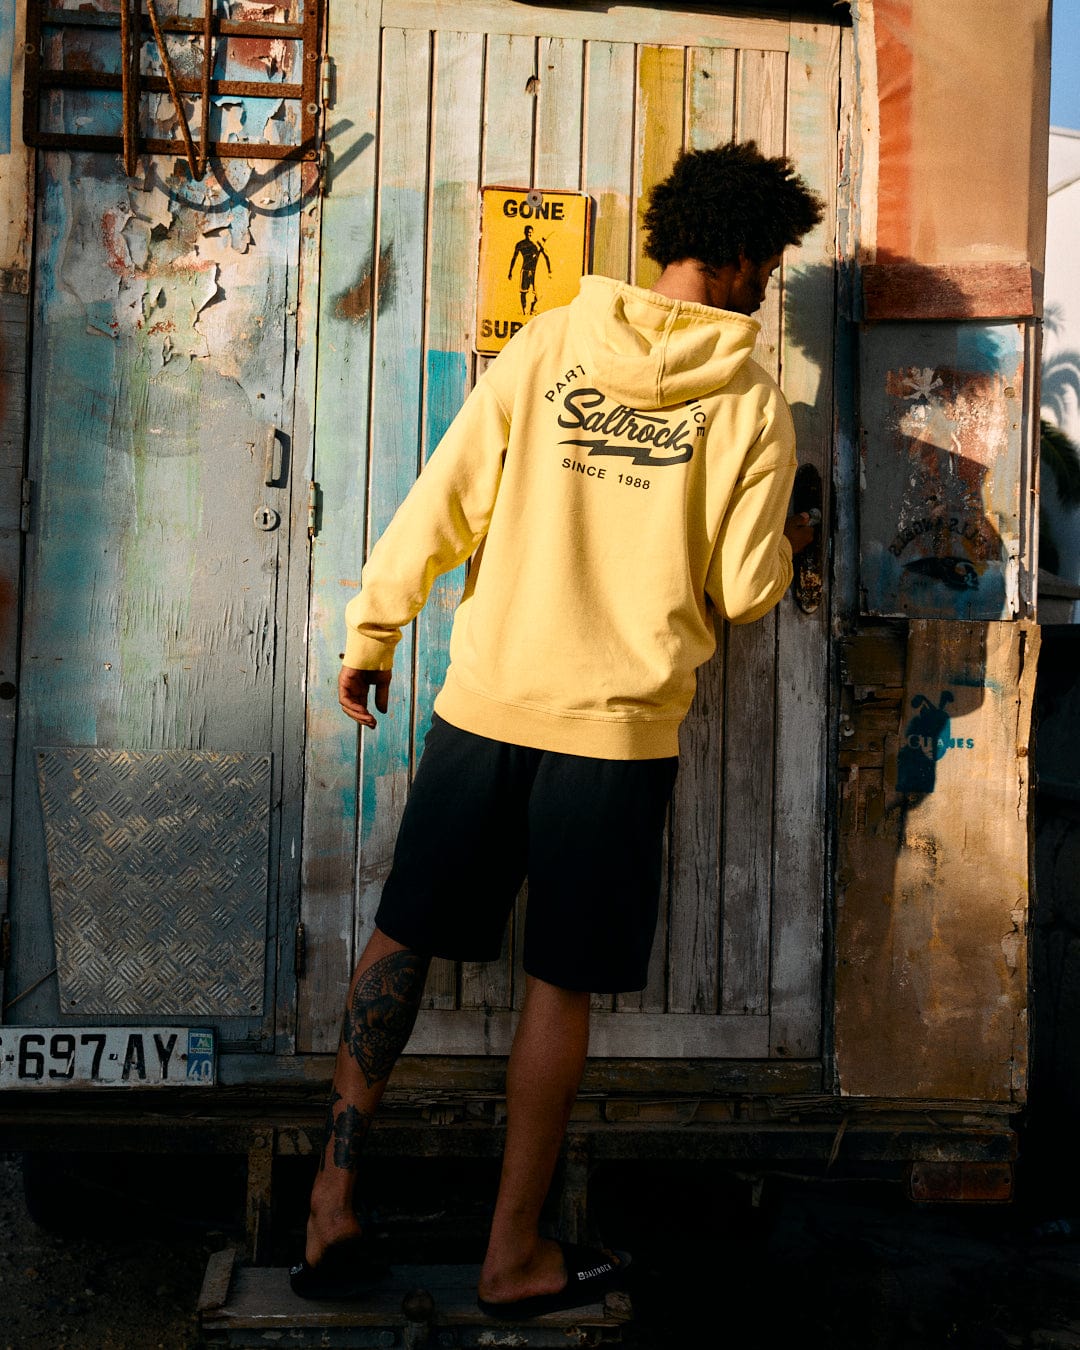 A person in a yellow Saltrock Gas Station - Recycled Mens Pop Hoodie and black shorts stands facing a colorful, weathered shipping container, with the text "gone surfing" visible above their head.